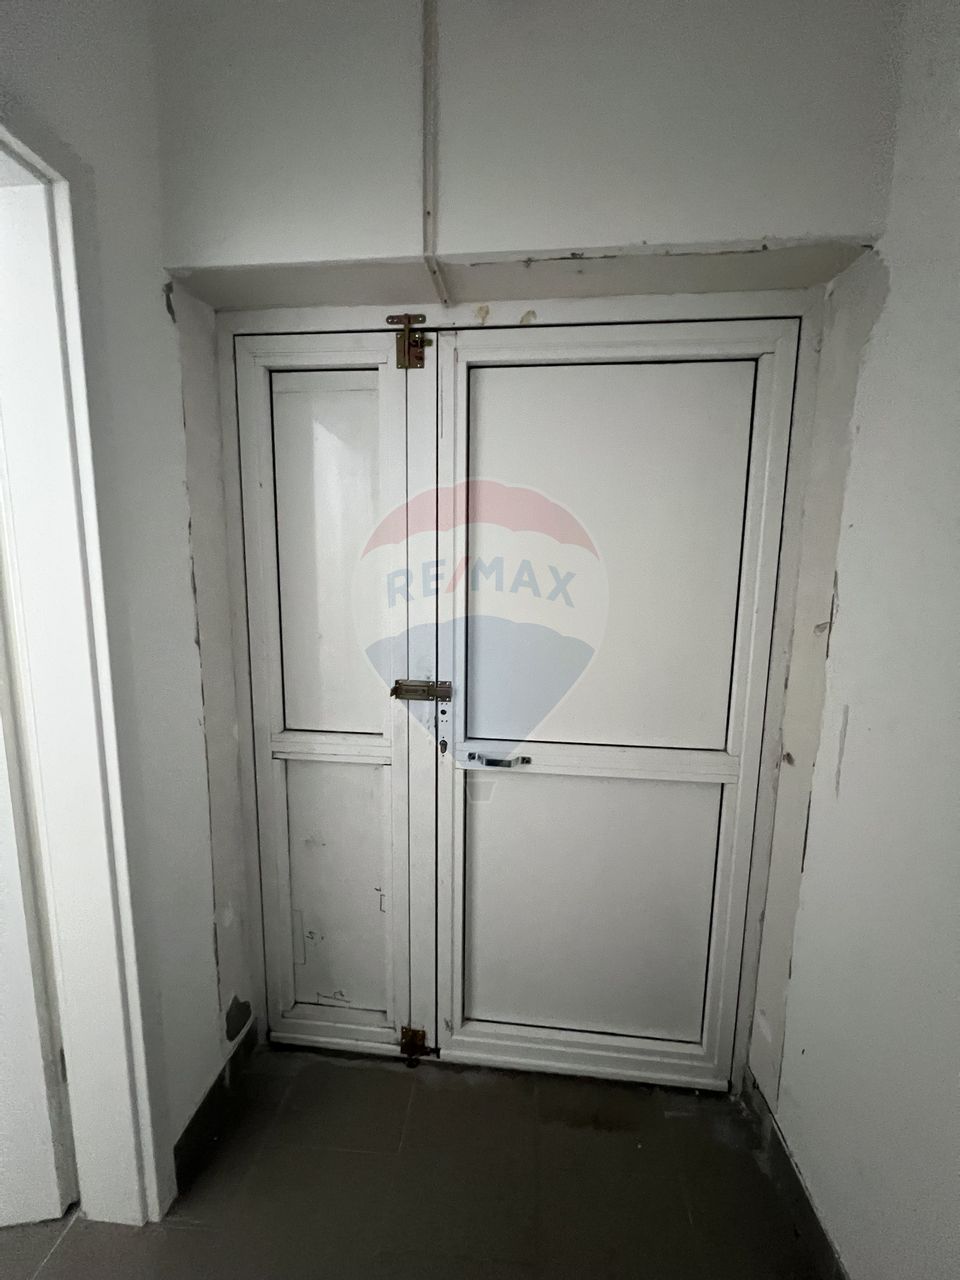 69.18sq.m Commercial Space for rent, Tomis III area